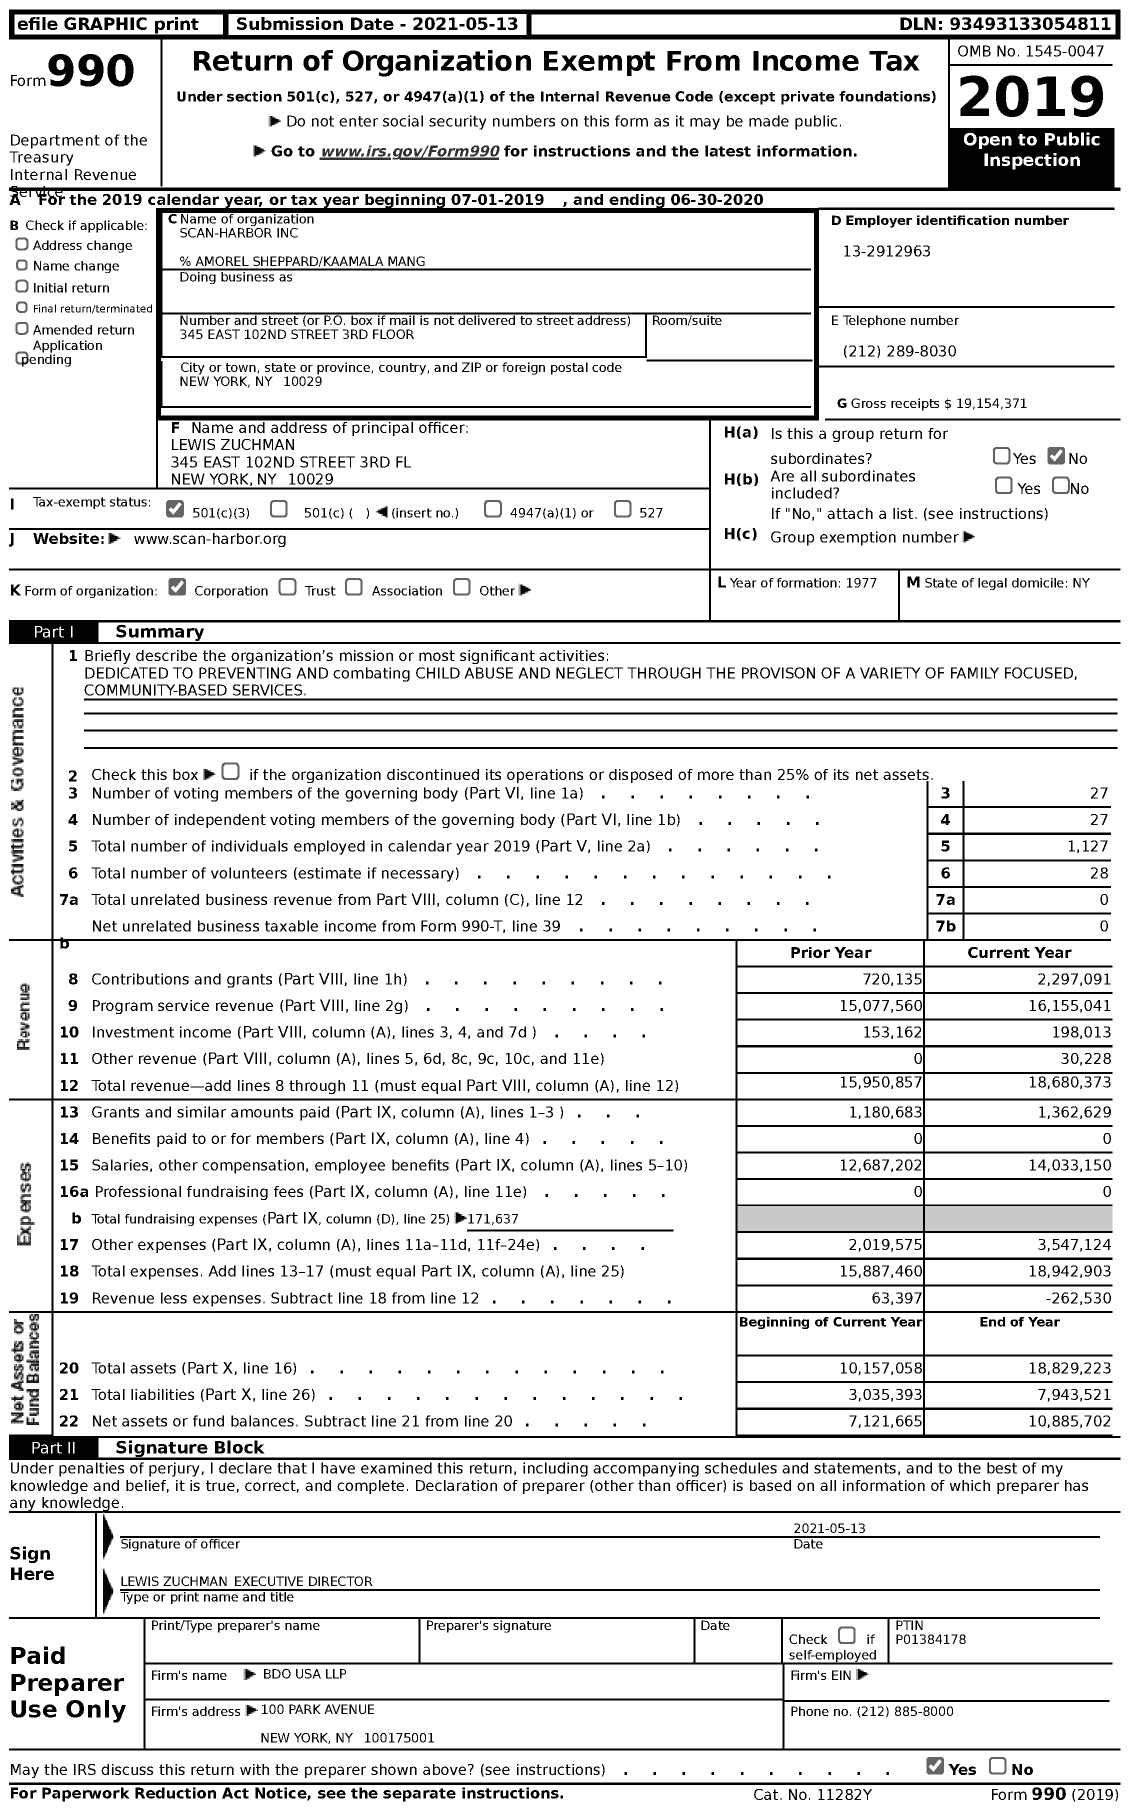 Image of first page of 2019 Form 990 for Scan-Harbor